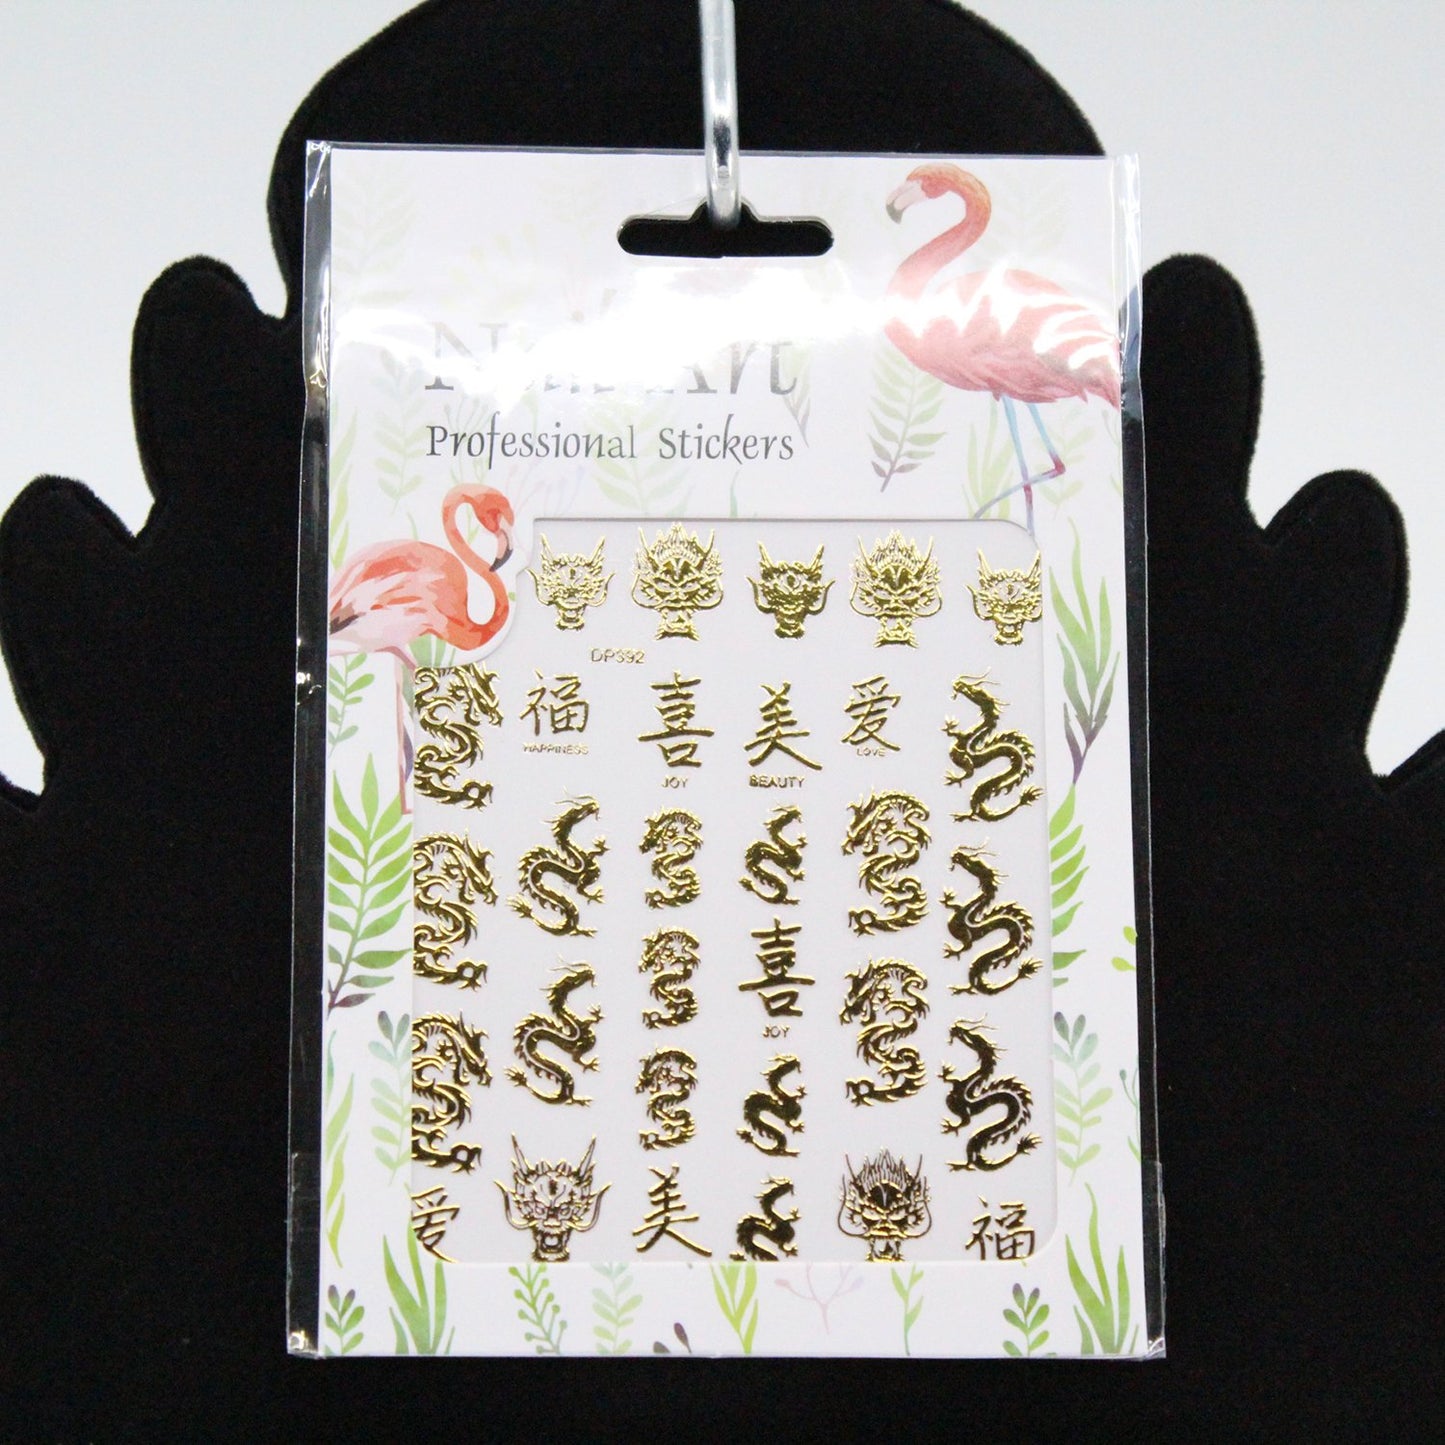 Finger Nail Art Tribal Chinese Dragon Stickers Gold DP392